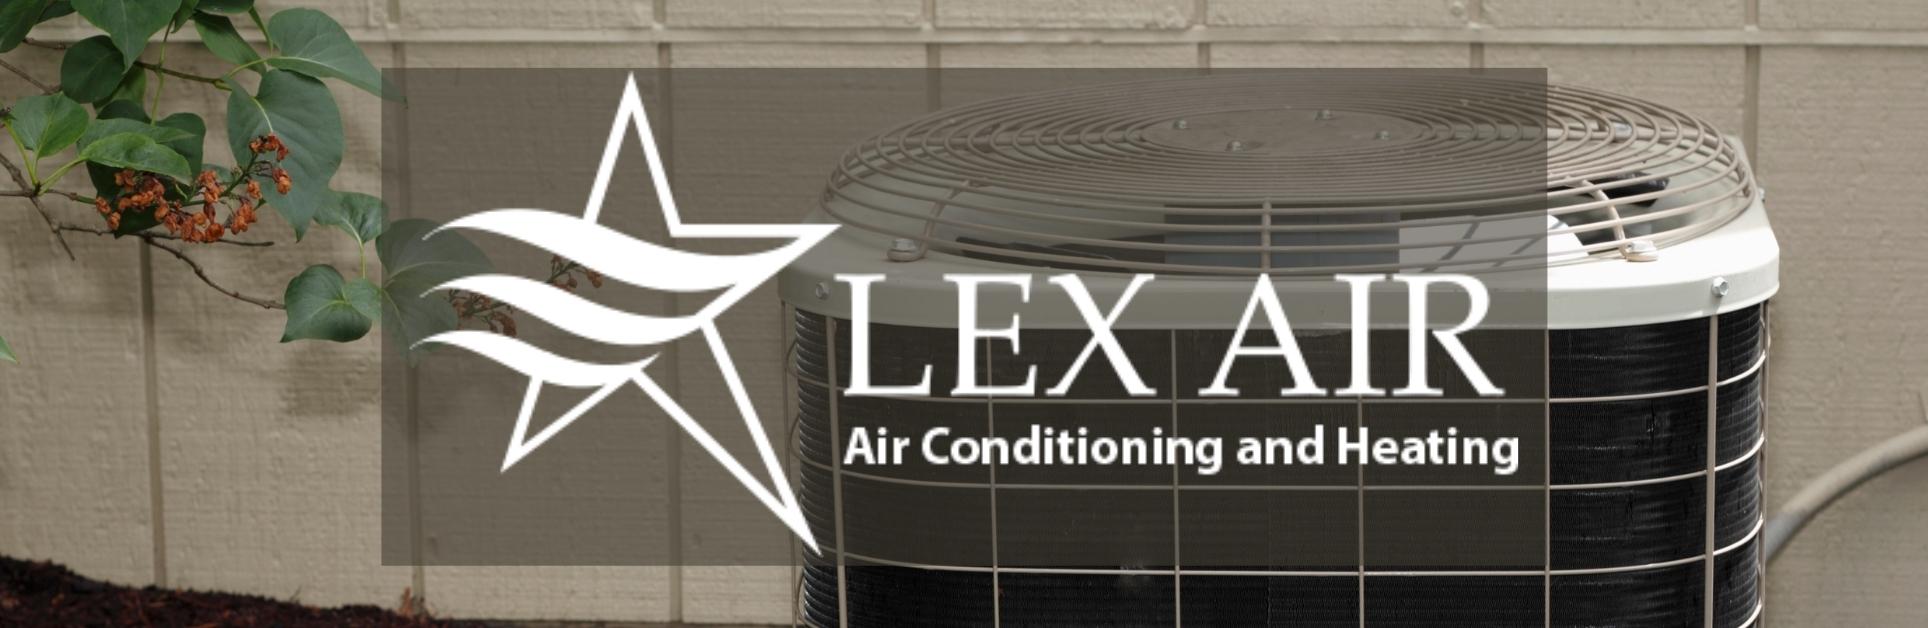 lex air air conditioning and heating, irving residential repair